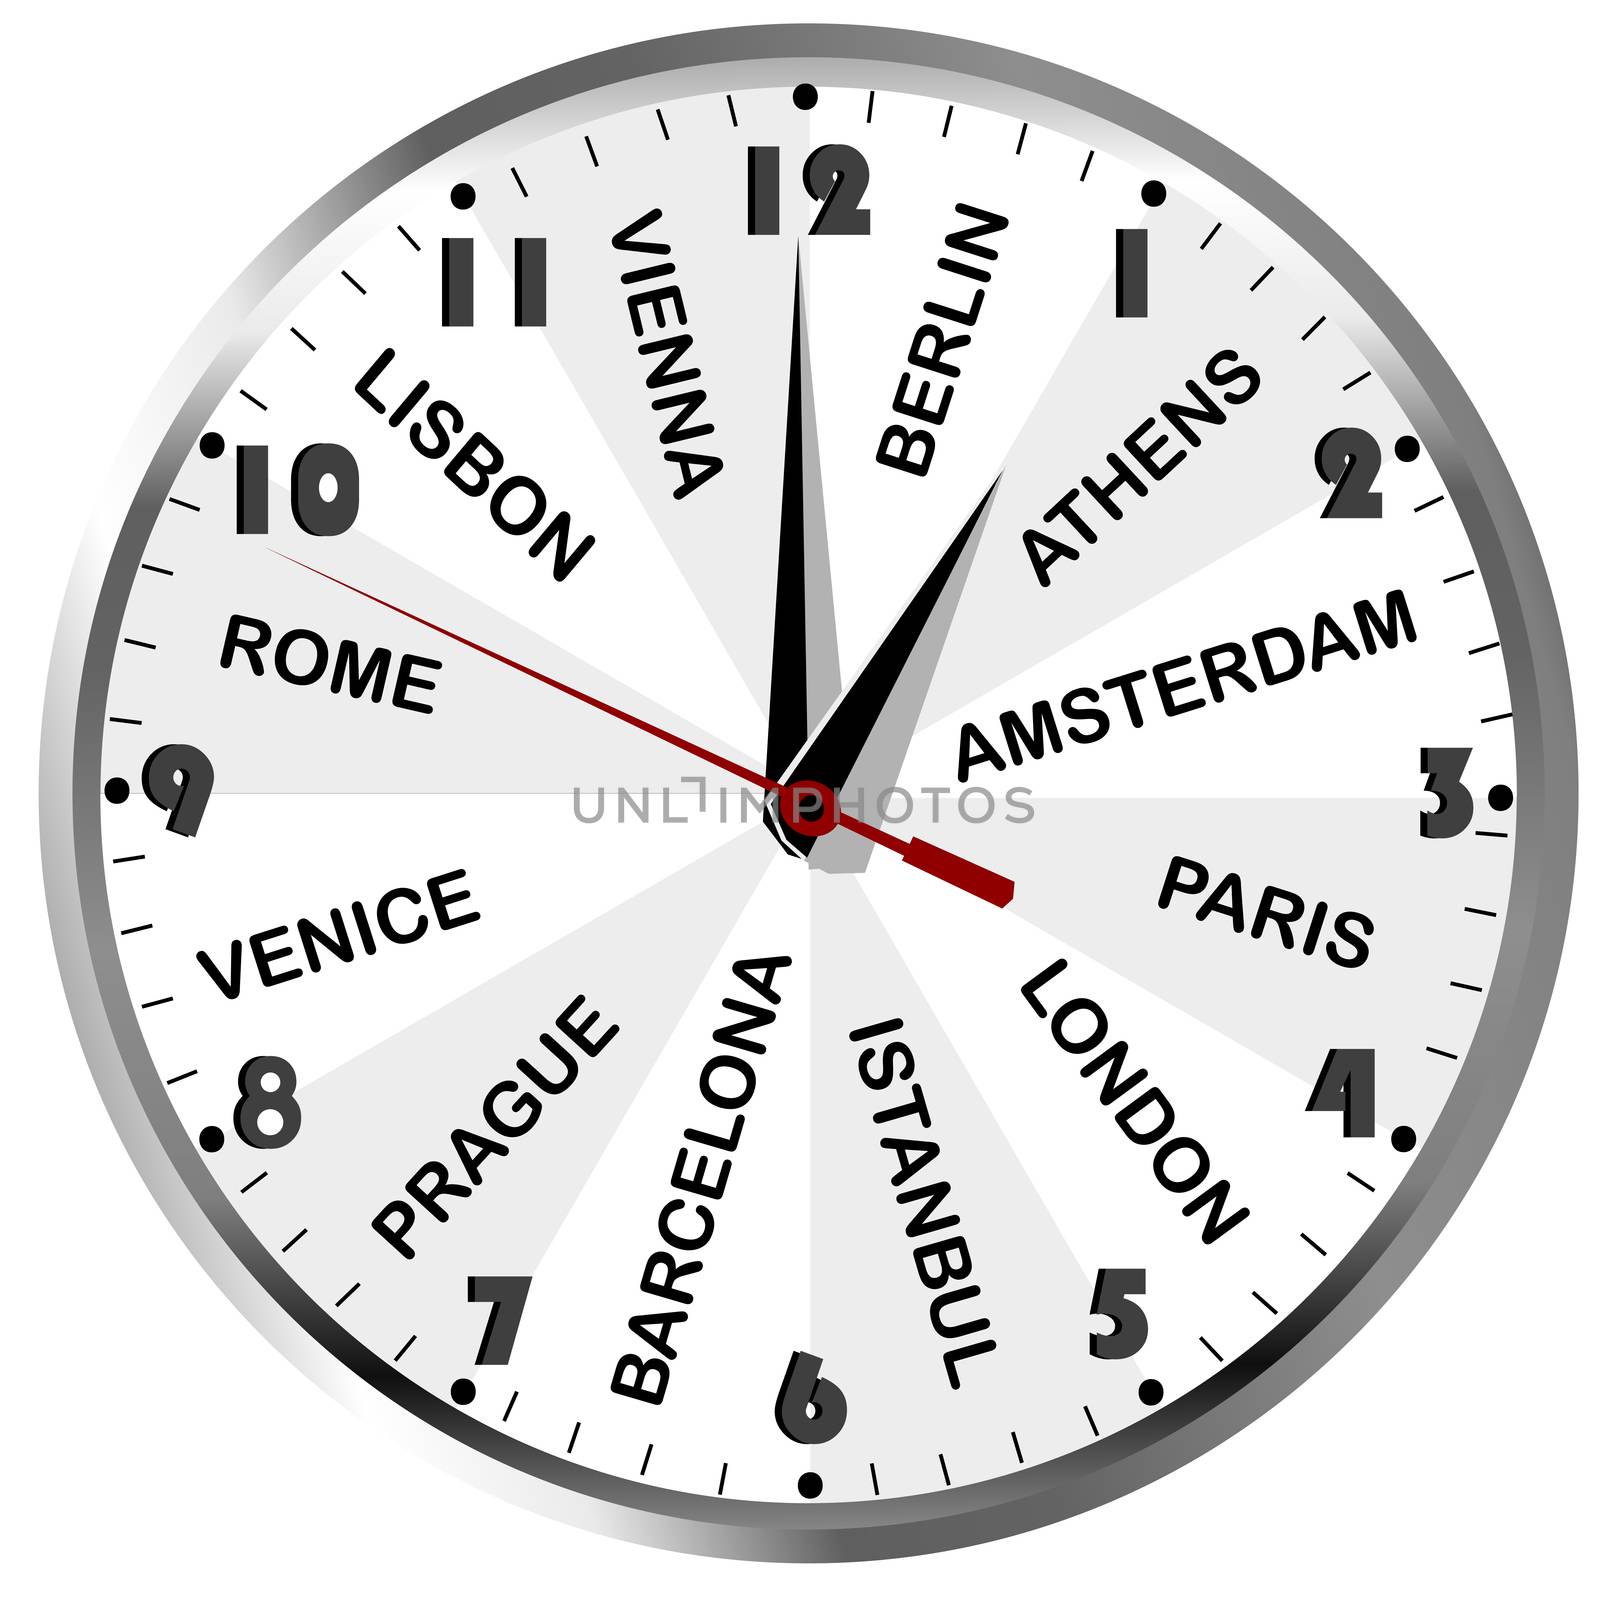 Wall clock with European city names for travel agency